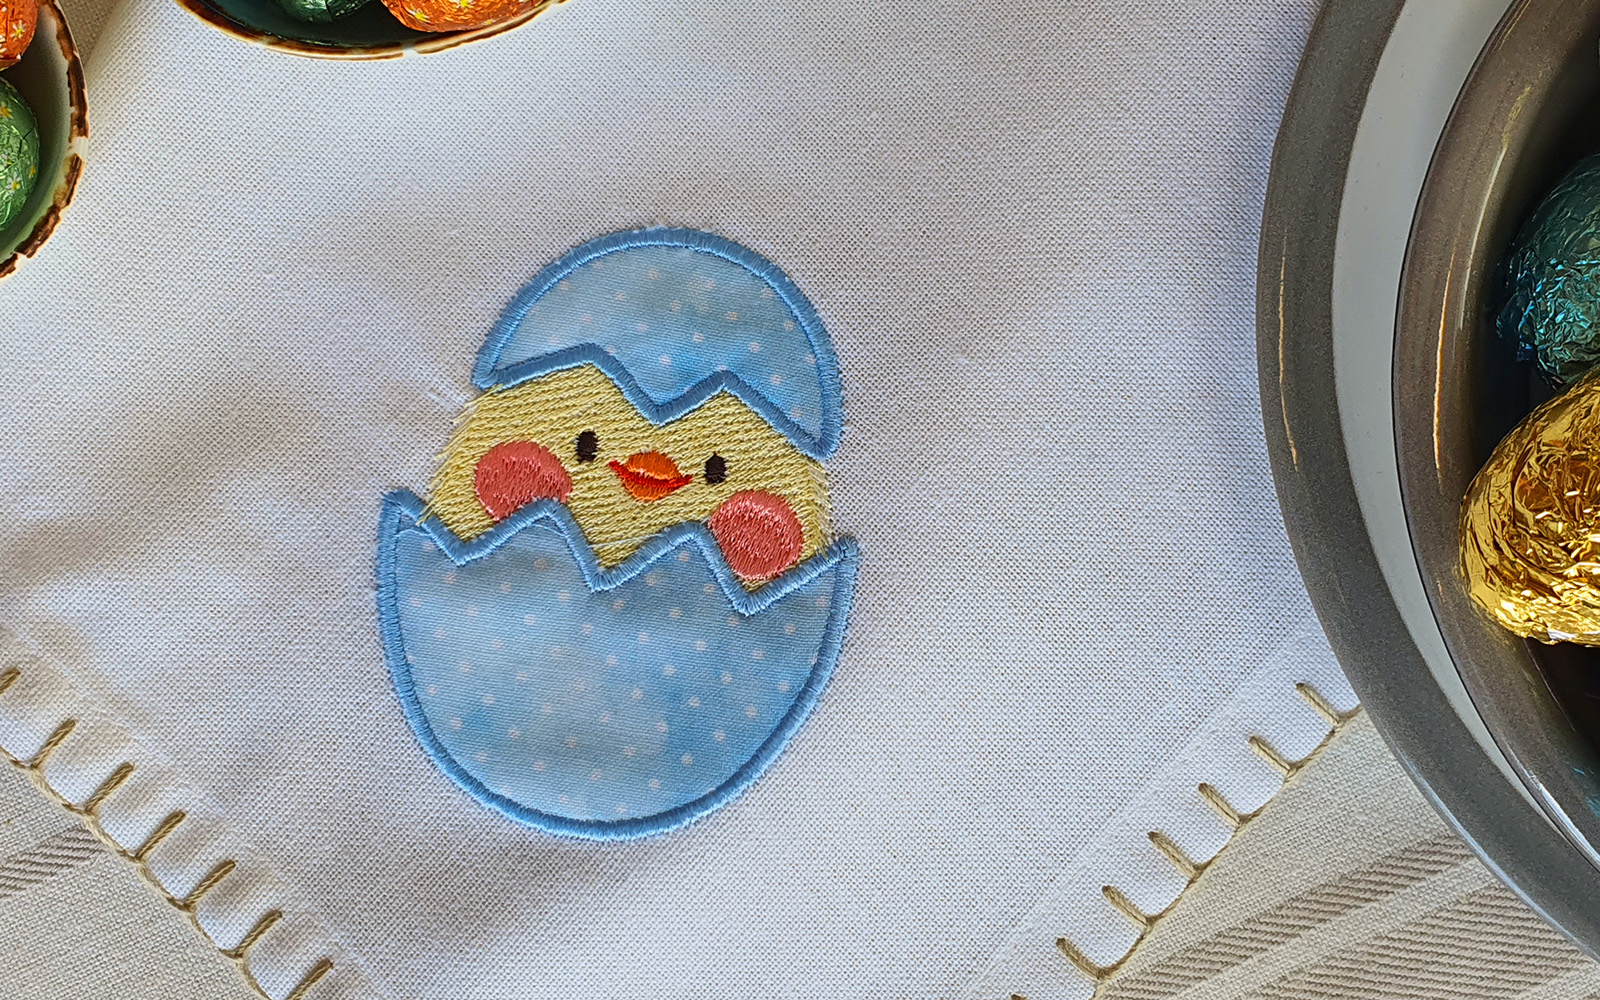 Blue and yellow chick embroidered on cream napkin